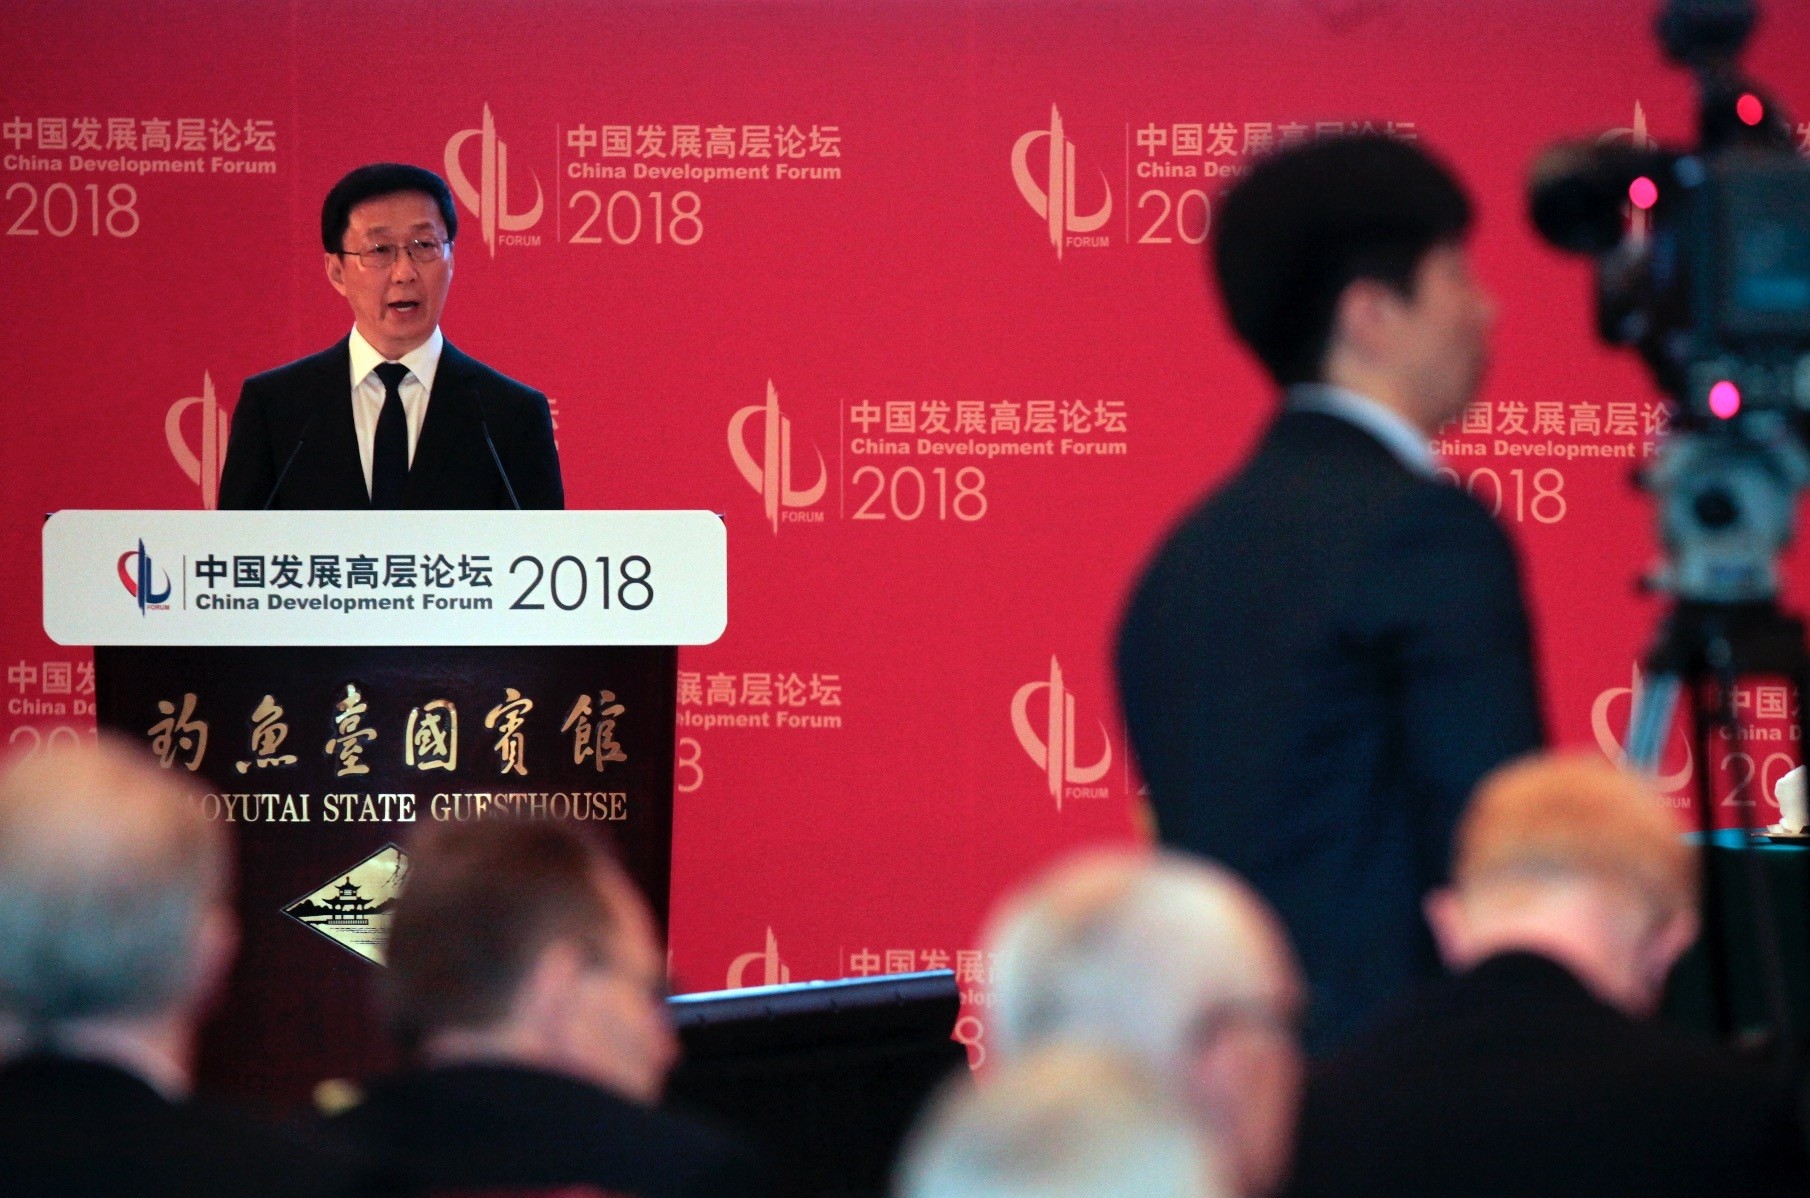 Chinese Vice Premier Han Zheng delivers his opening speech in the China Development Forum held at the Diaoyutai State Guesthouse in Beijing, March 25.